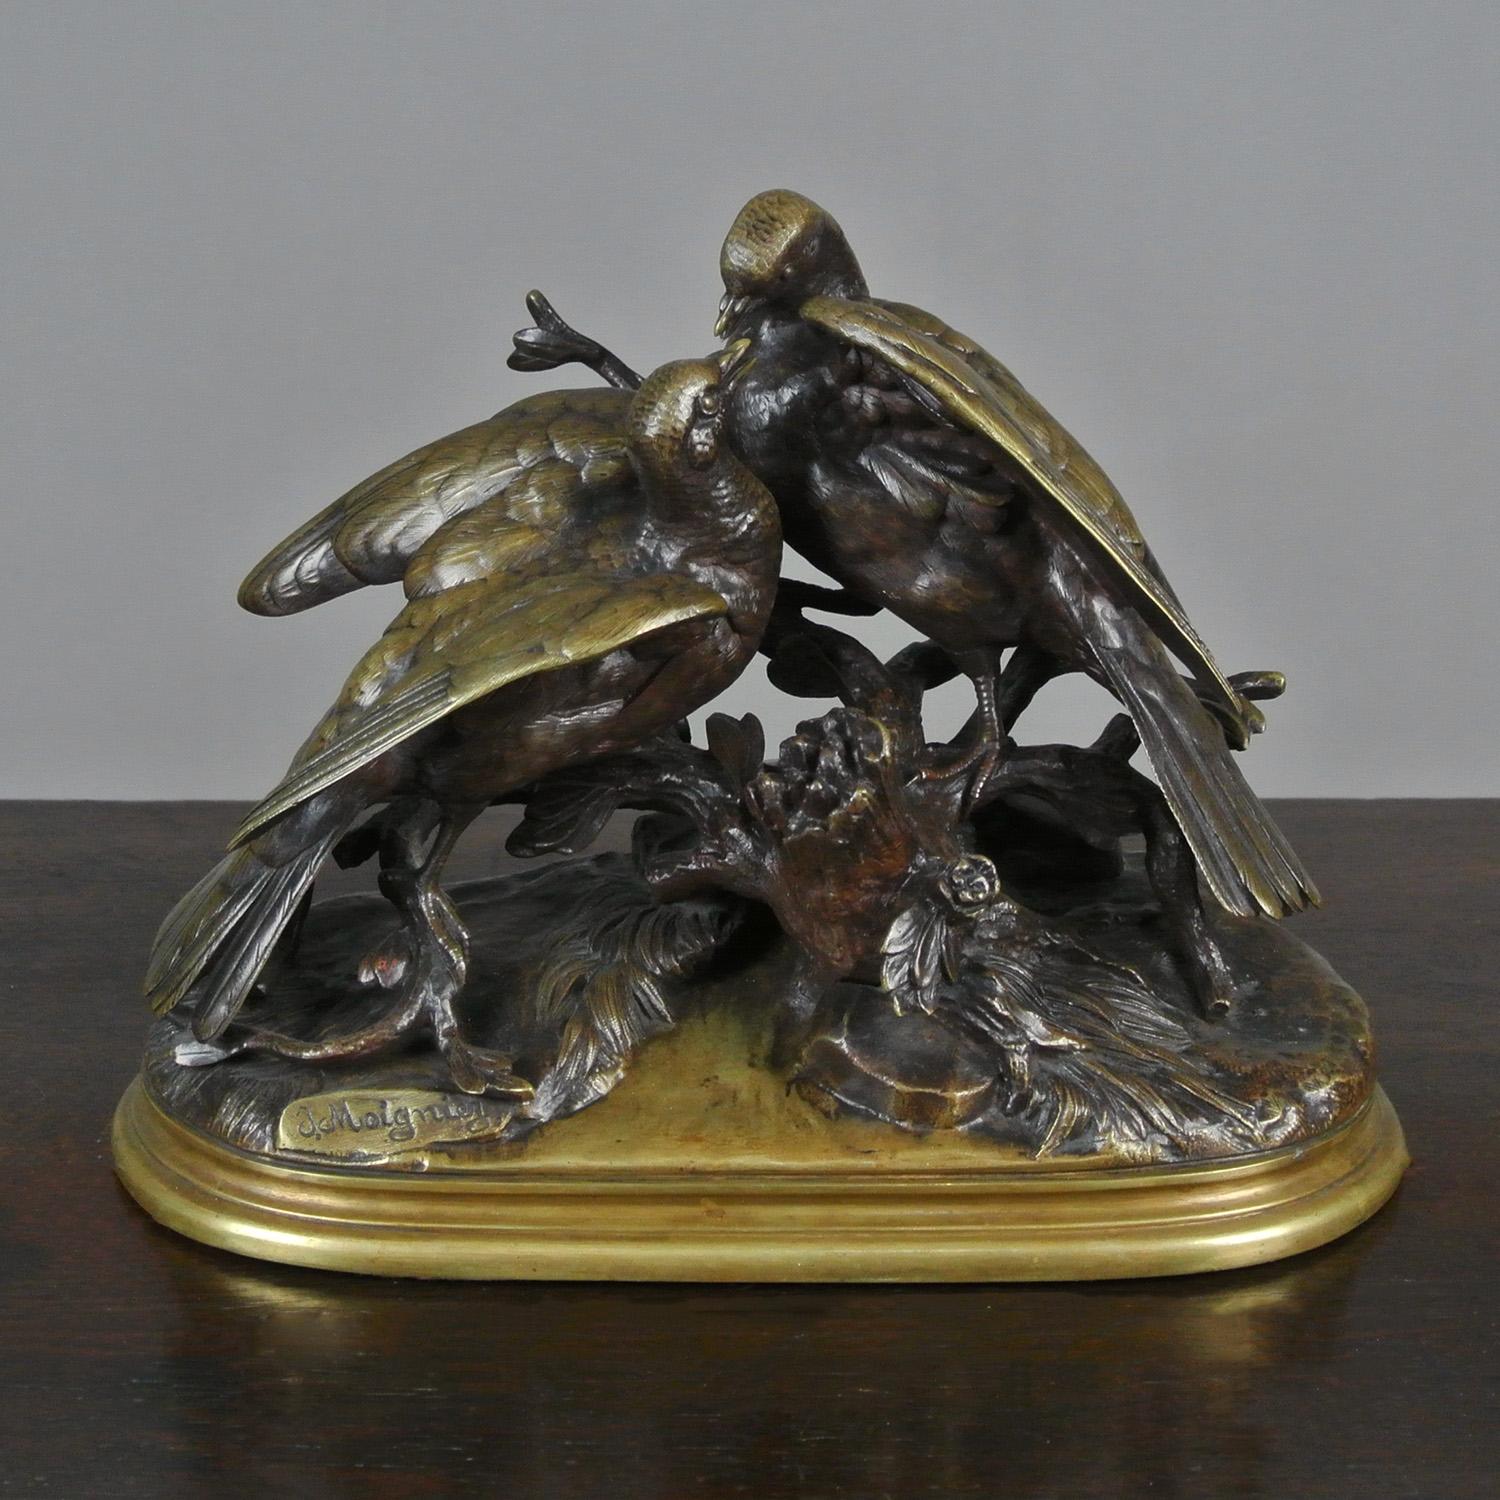 A very fine original bronze group of lovebirds by the French sculptor Jules Moigniez (b. 1835 d. 1984)

Moigniez studied in Paris under Comolera and exhibited first at the Exposition Universelle of 1865.

He received a medal at the Great Exhibition